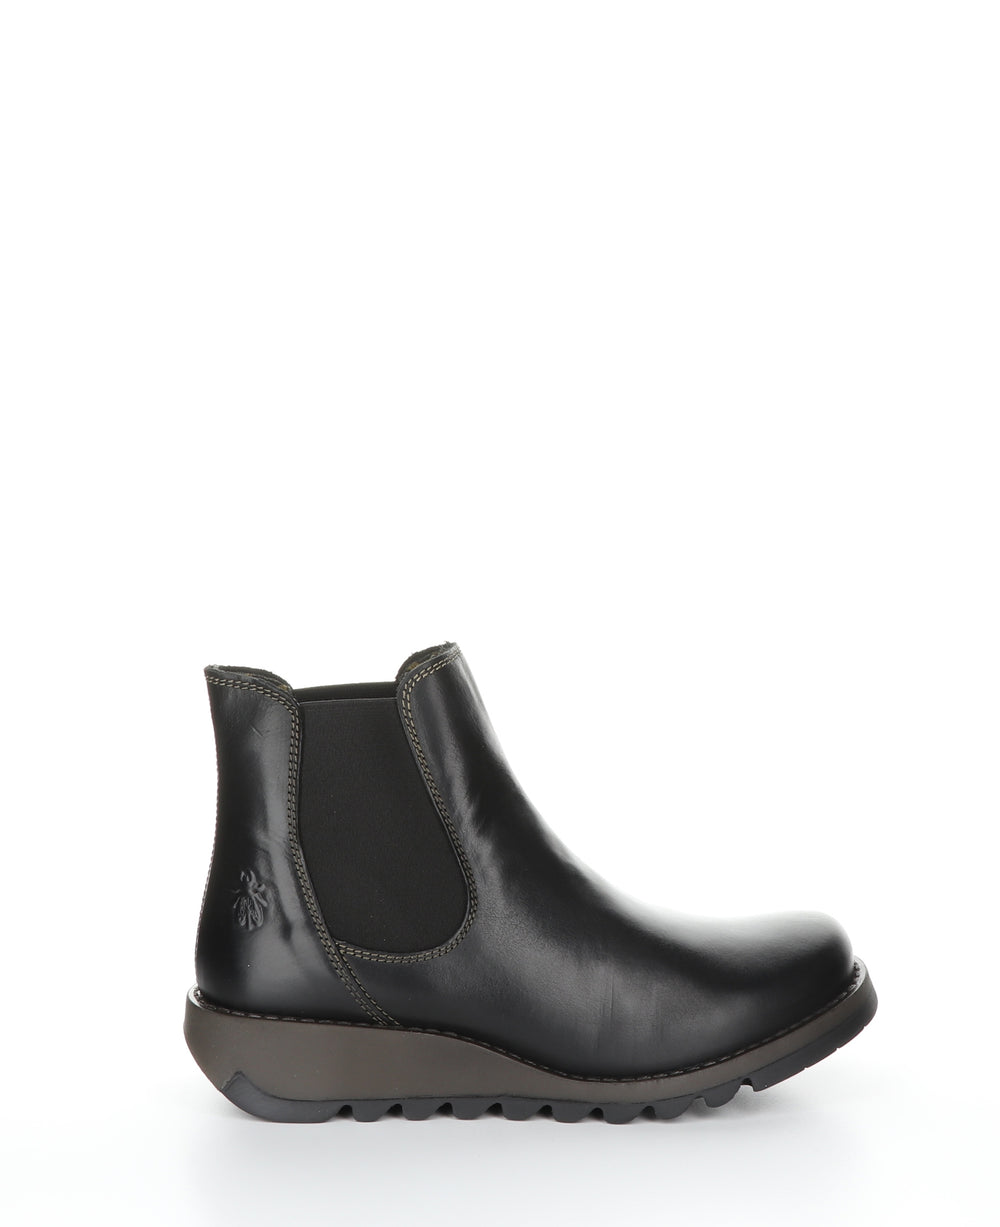 SALV Black Round Toe Ankle Boots|SALV Bottines à Bout Rond in Noir